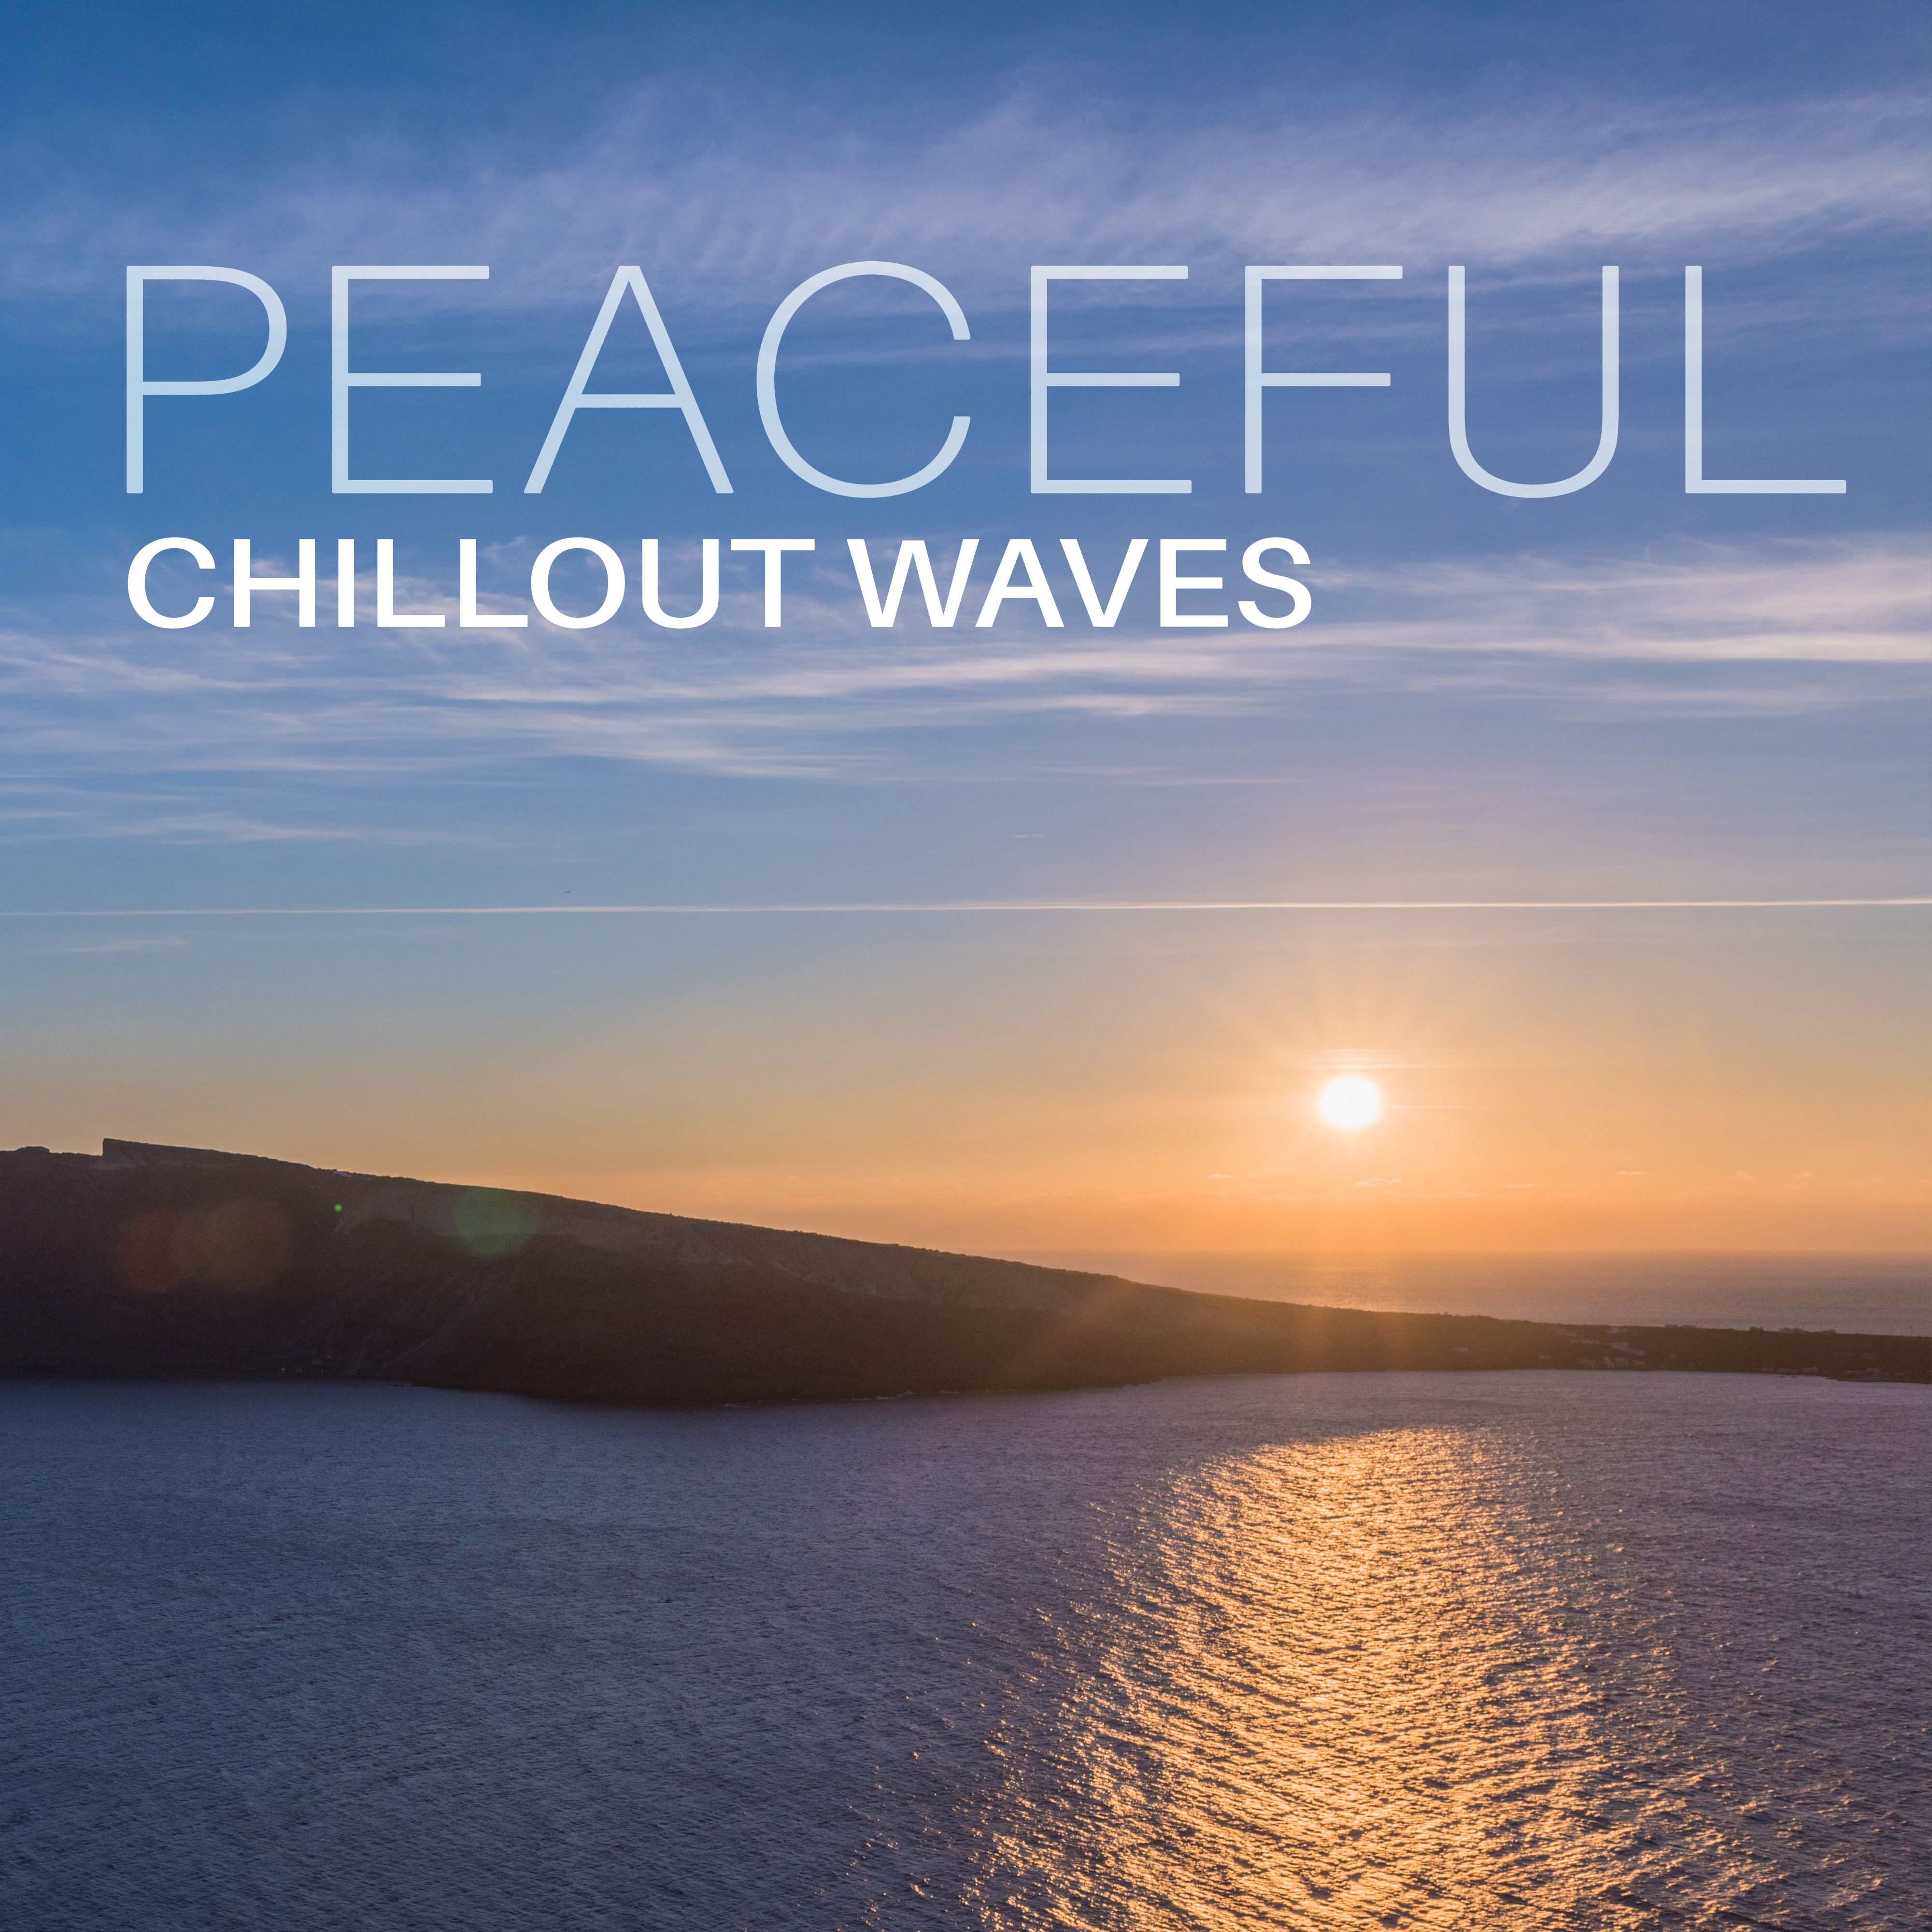 Peaceful Chillout Waves – Summer Relaxation, Stress Relief, Beach House Lounge, Chilled Music